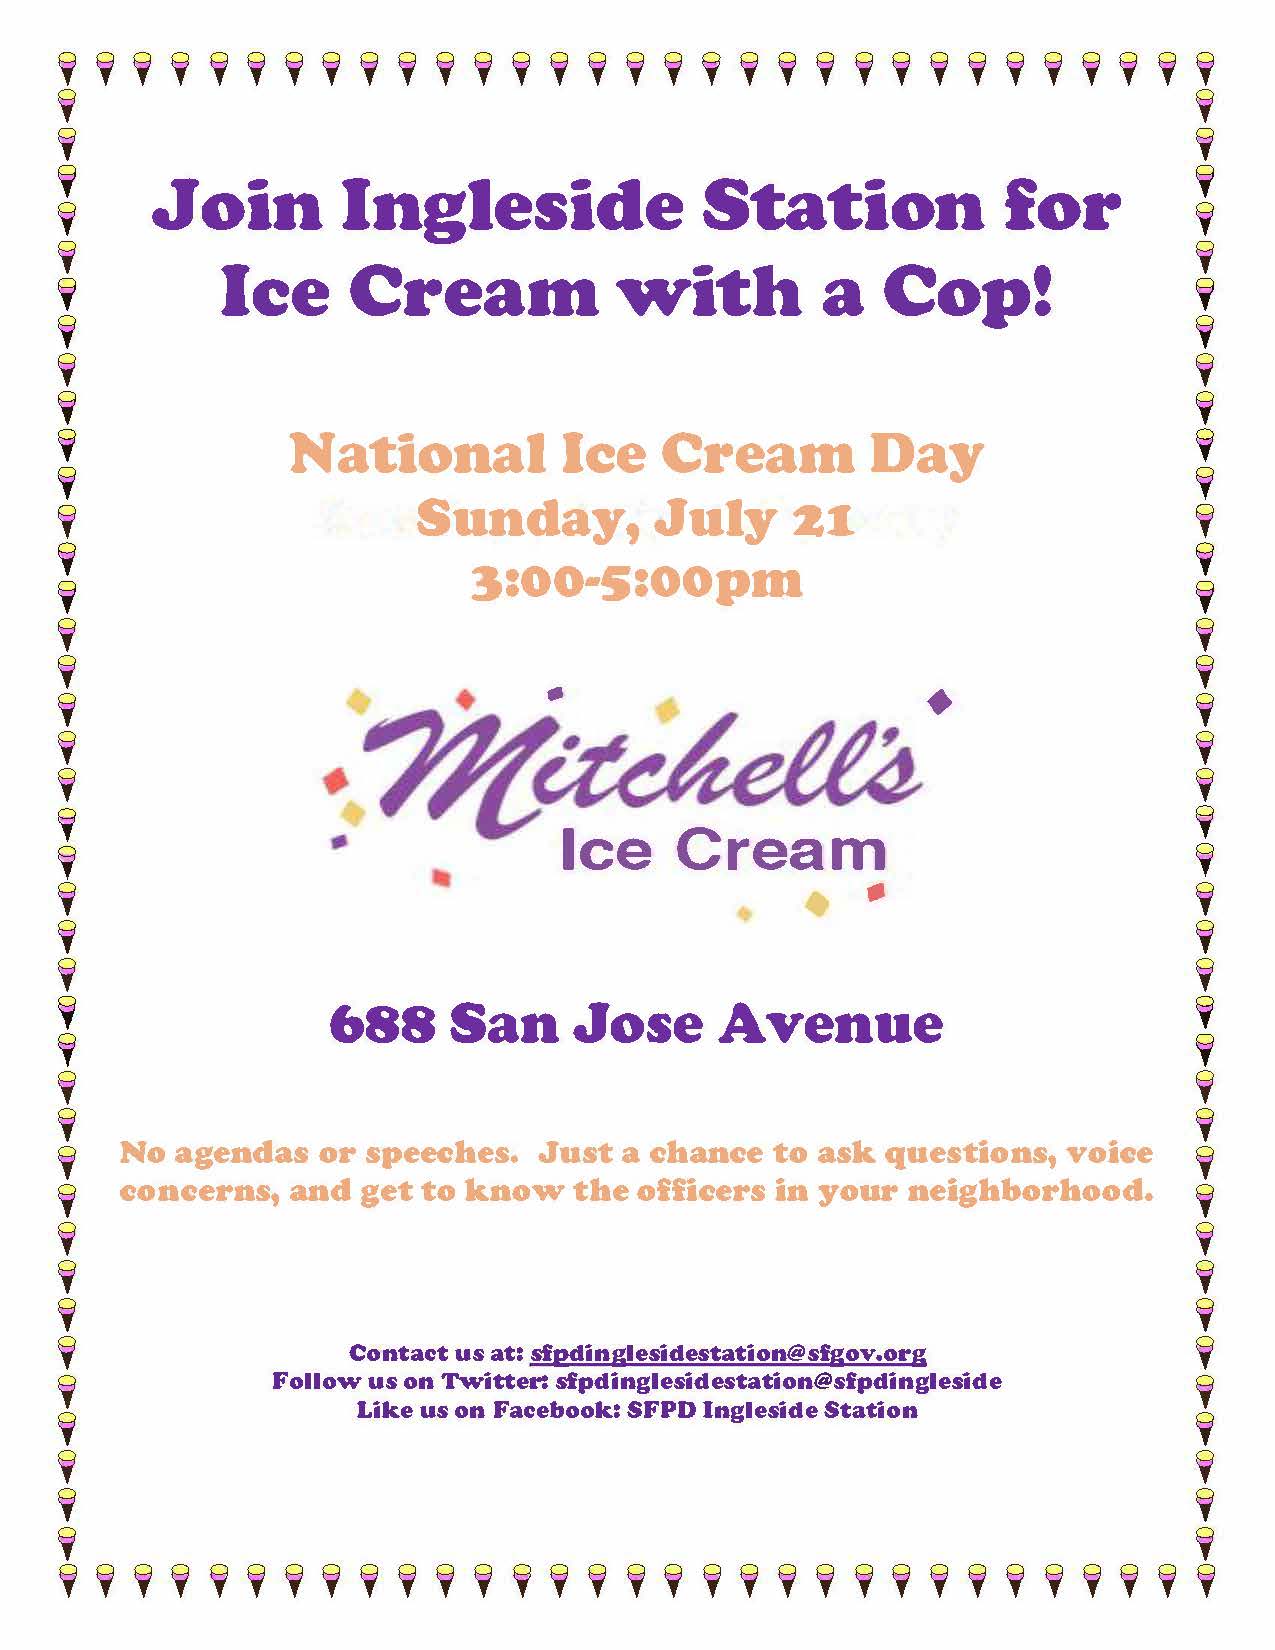 Text flyer for Ingleside Ice Cream with a Cop event